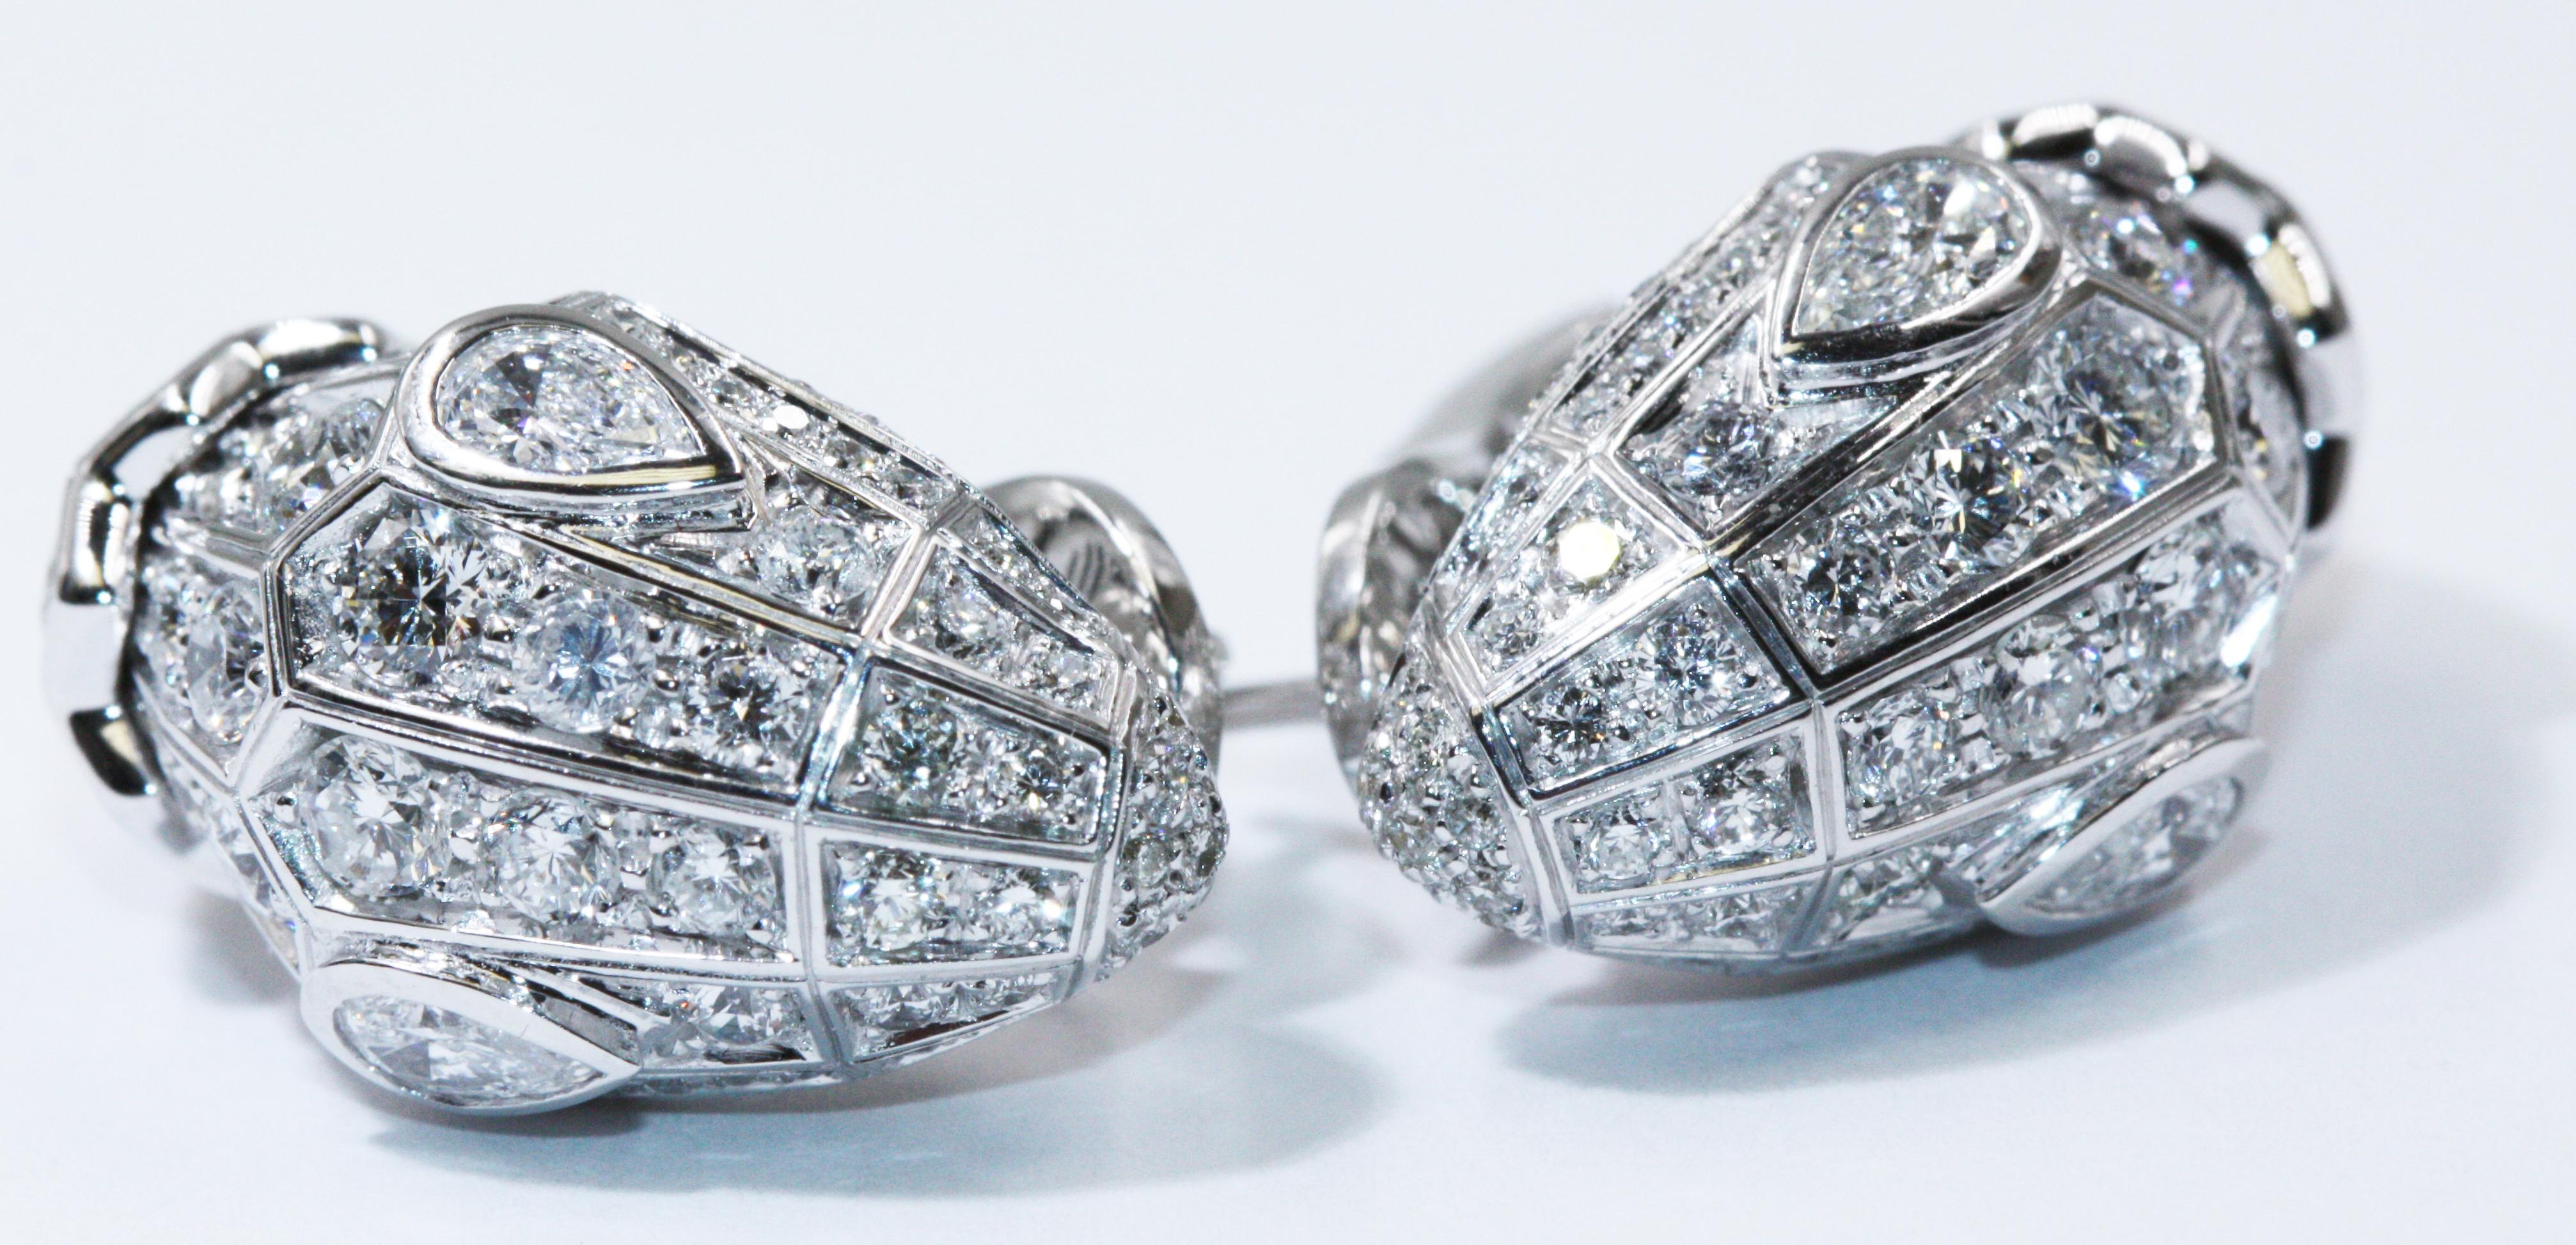 Bulgari 18k White Gold Serpenti Full Diamond Pave Earrings
Metal: 18K White Gold
Weight: Total Weight approximately 17 grams, Individual Earring Weight approximately 8.5 grams
Stones: Diamond
Signatures: Bulgari
Included Items: Box and